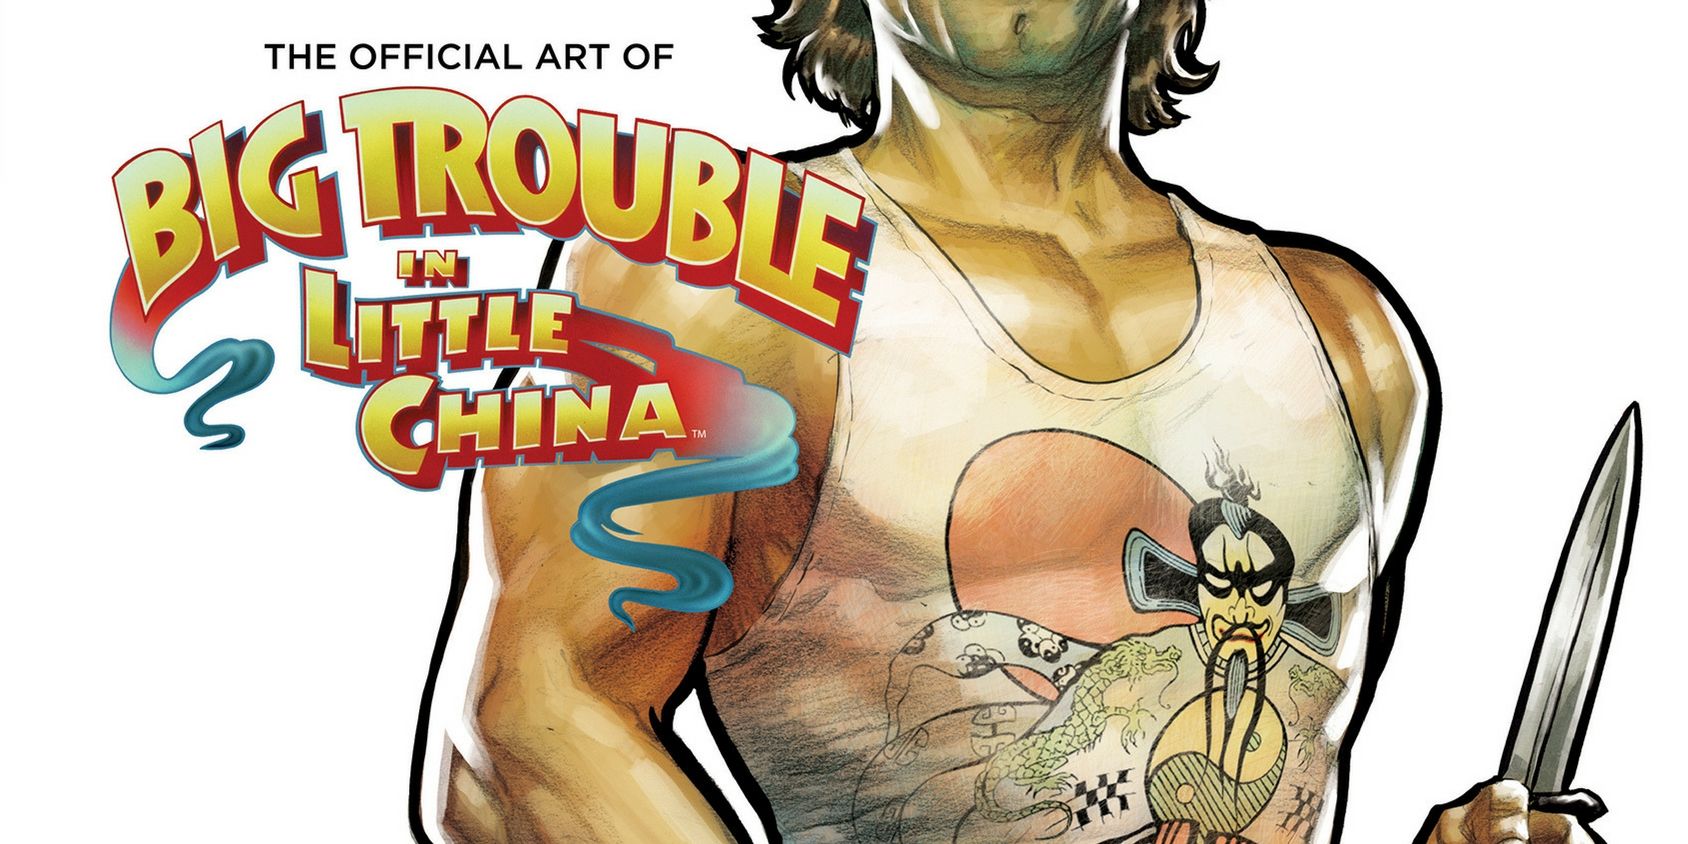 The Official Art of Big Trouble Little China Cover - Cropped